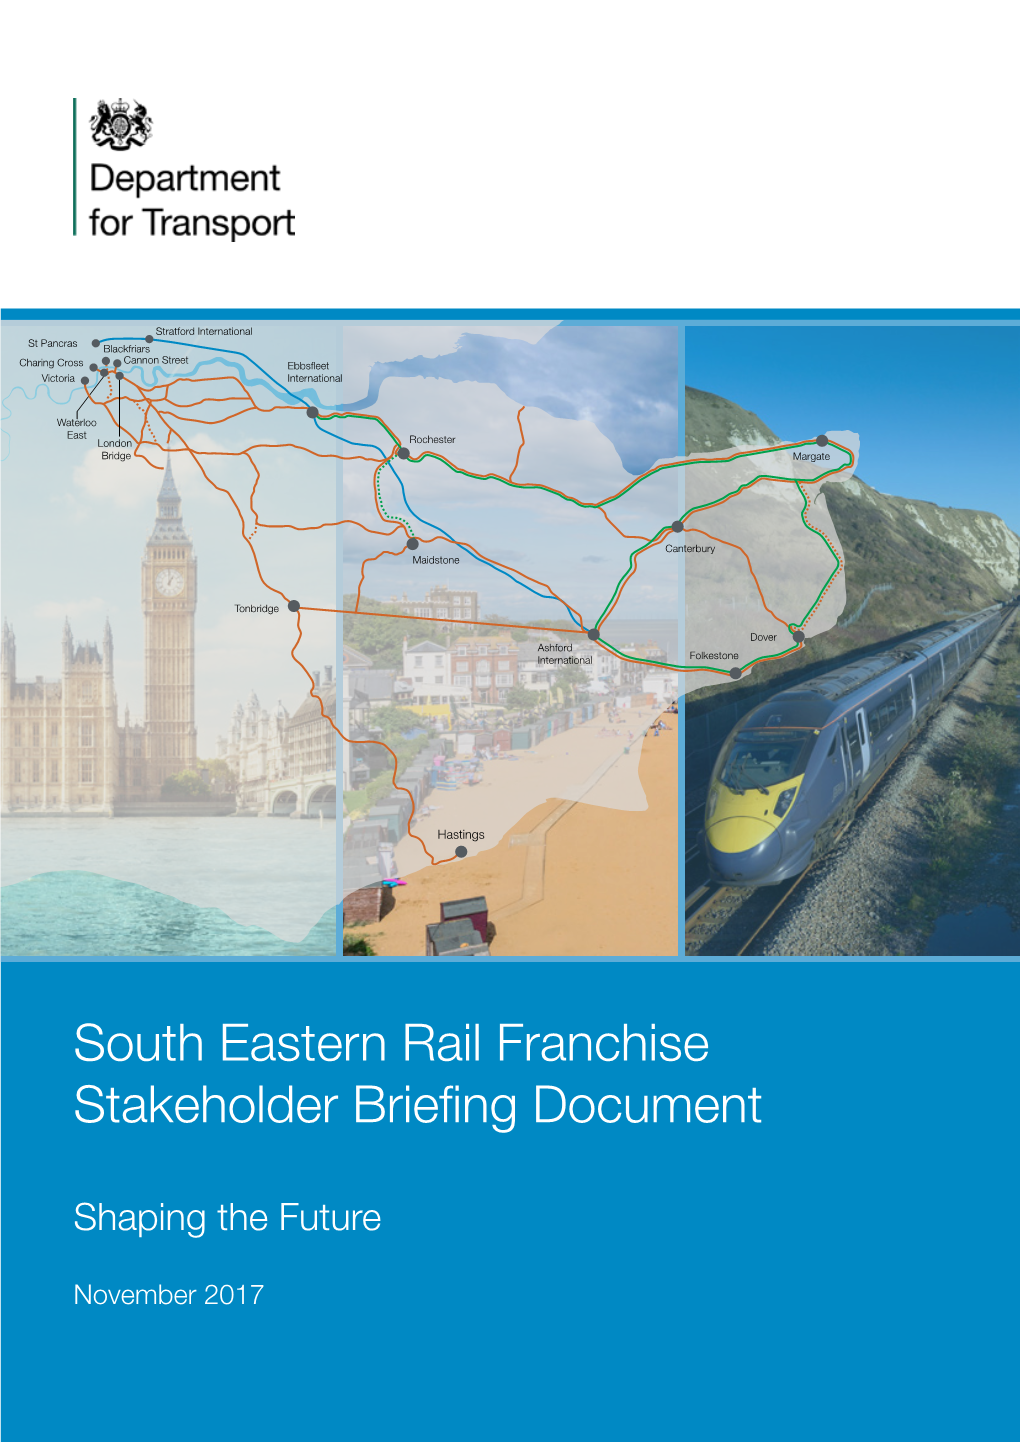 South Eastern Rail Franchise Stakeholder Briefing Document